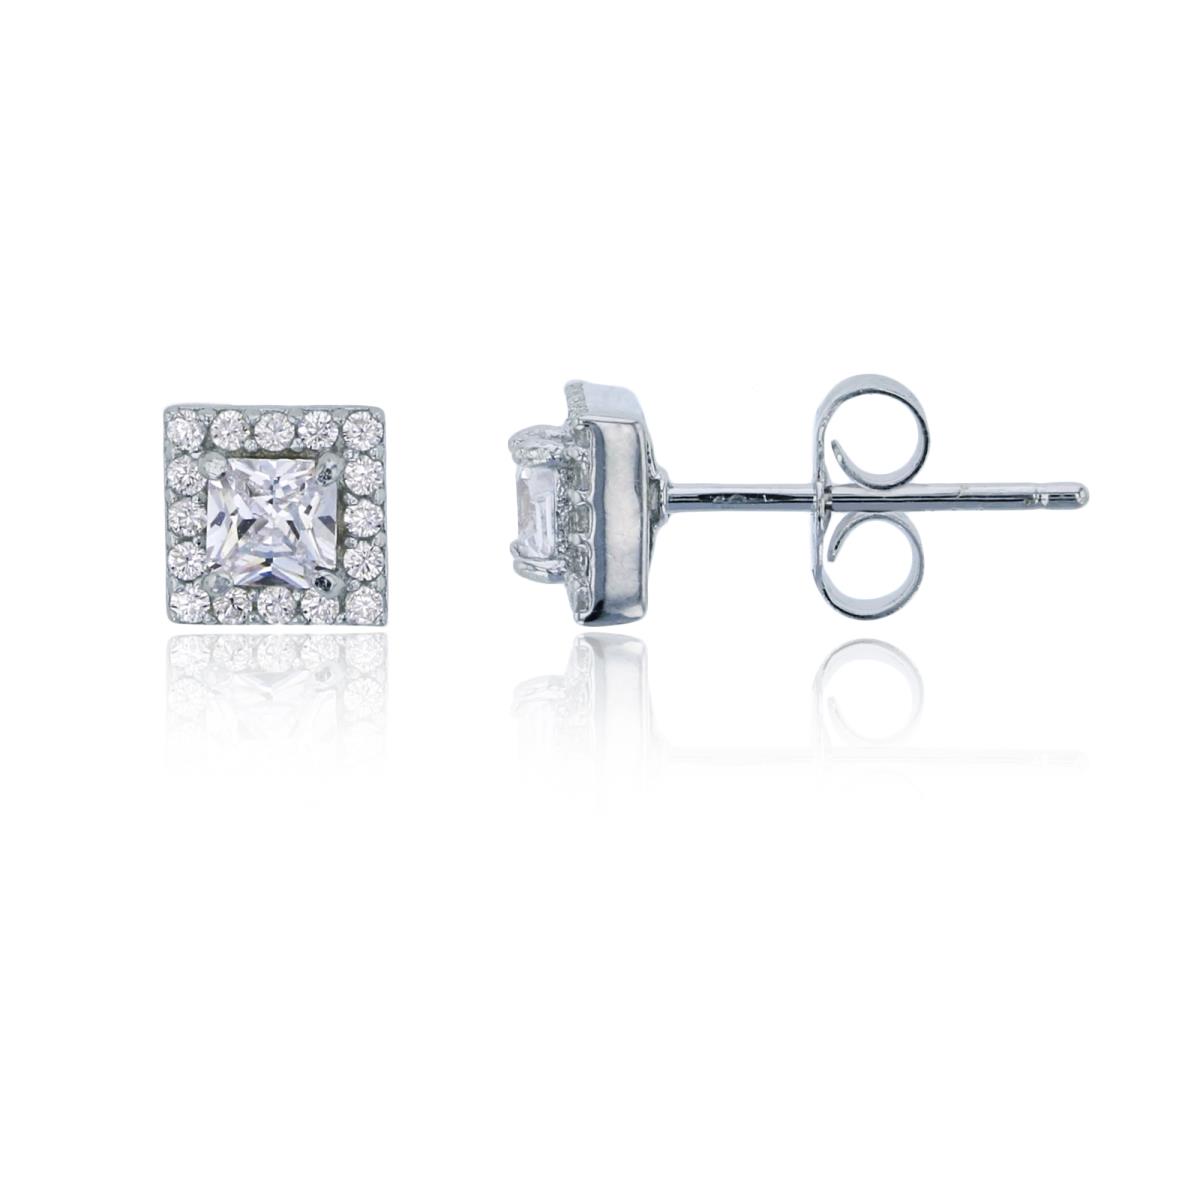 Sterling Silver Rhodium 6x6mm Square Halo Stud Earring